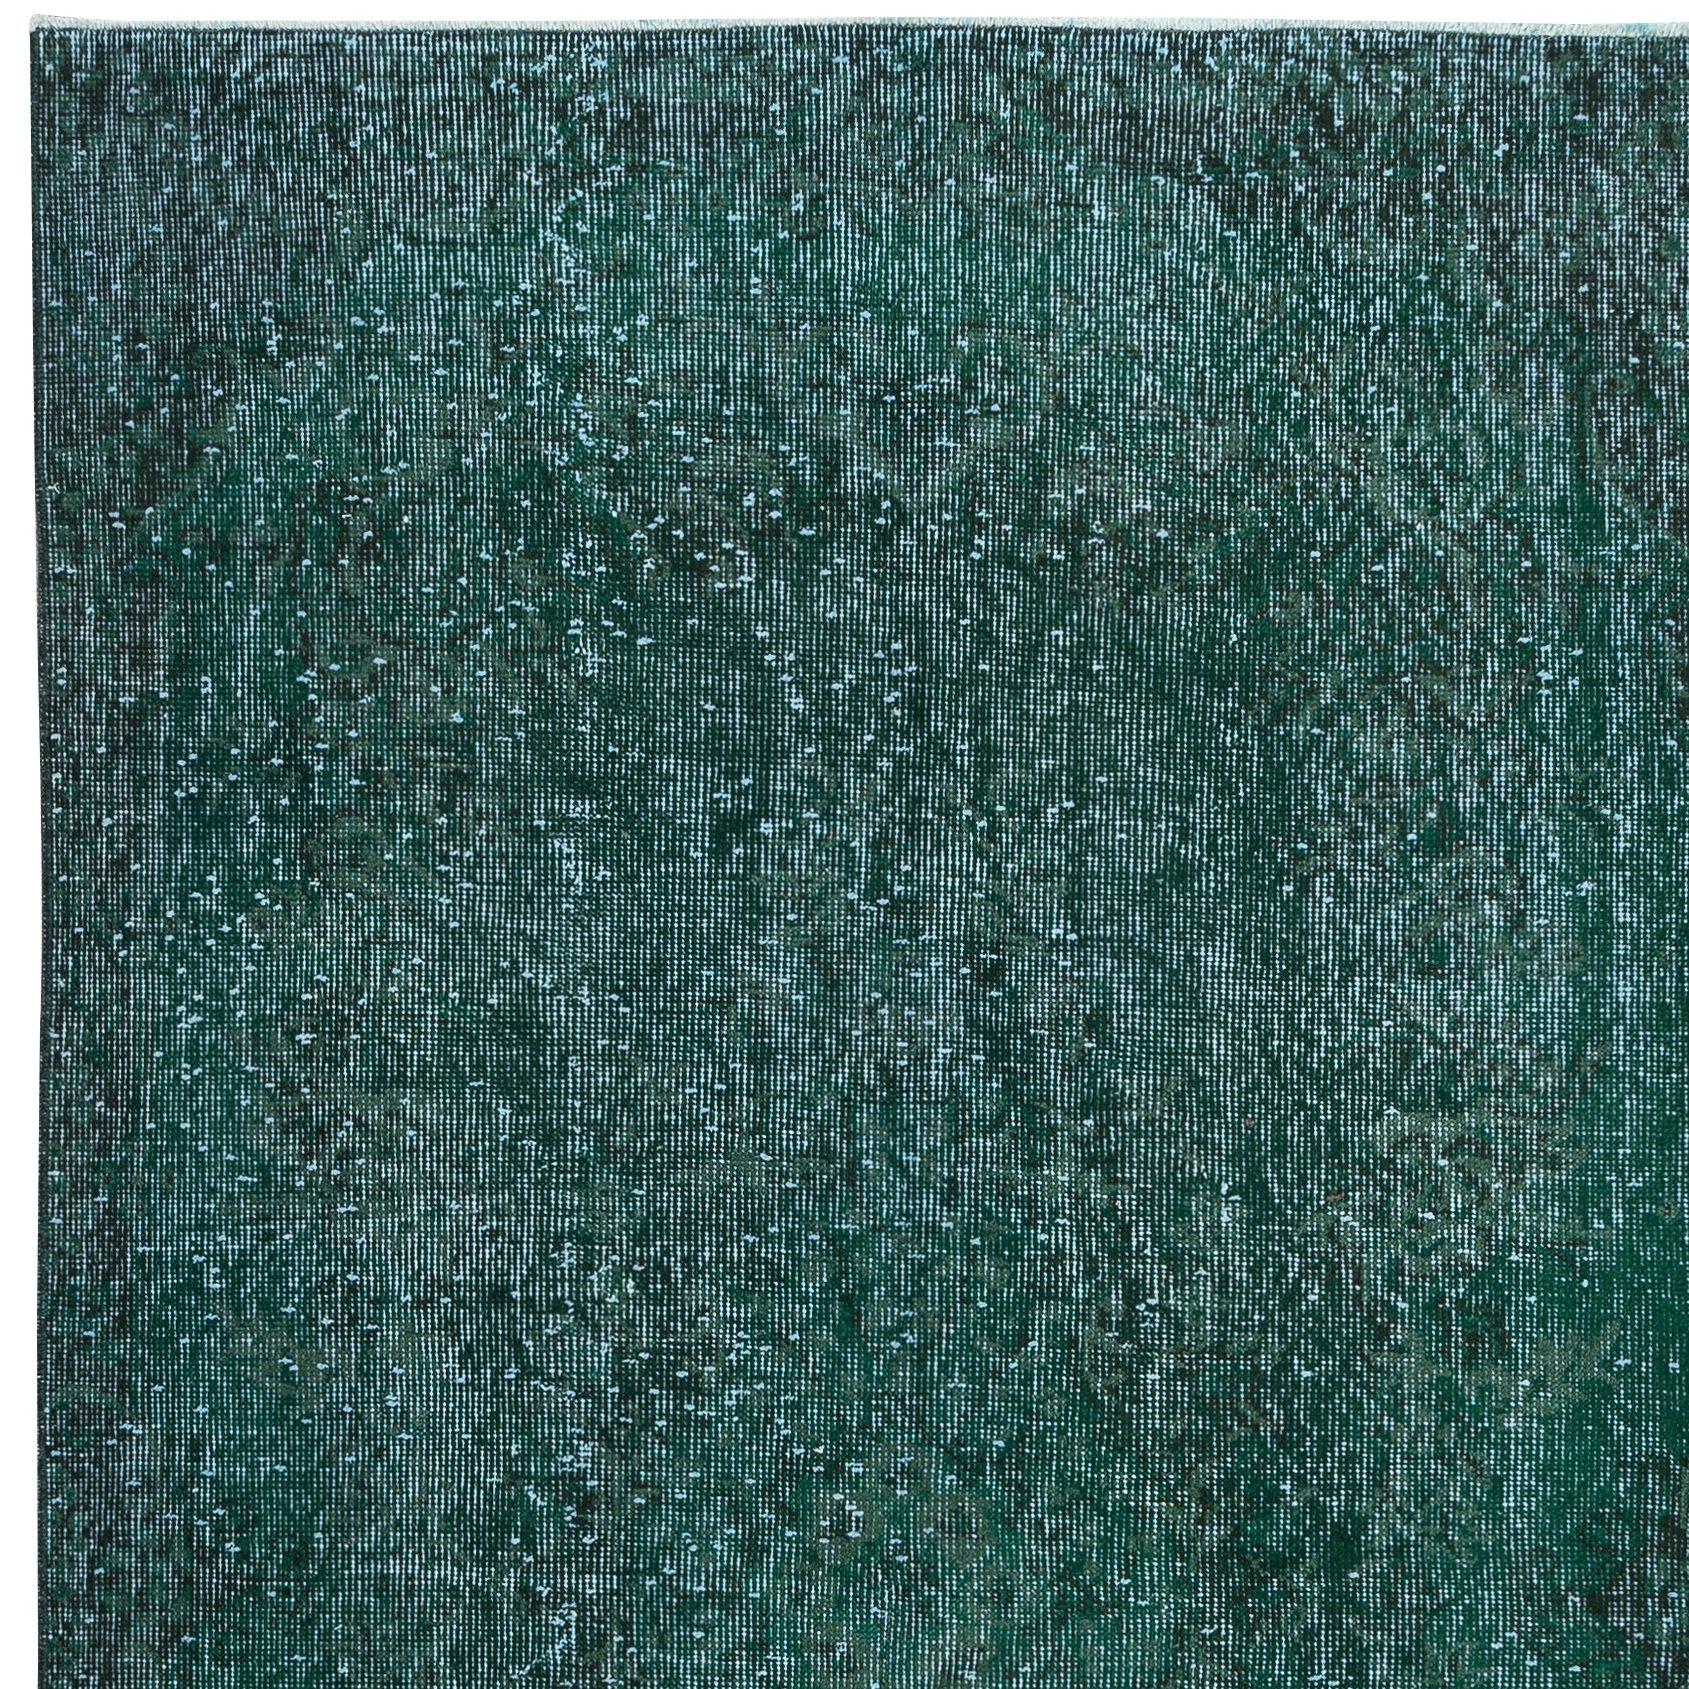 Turkish 3.8x7 Ft Vintage Green Accent Rug, Handwoven and Handknotted in Turkey For Sale